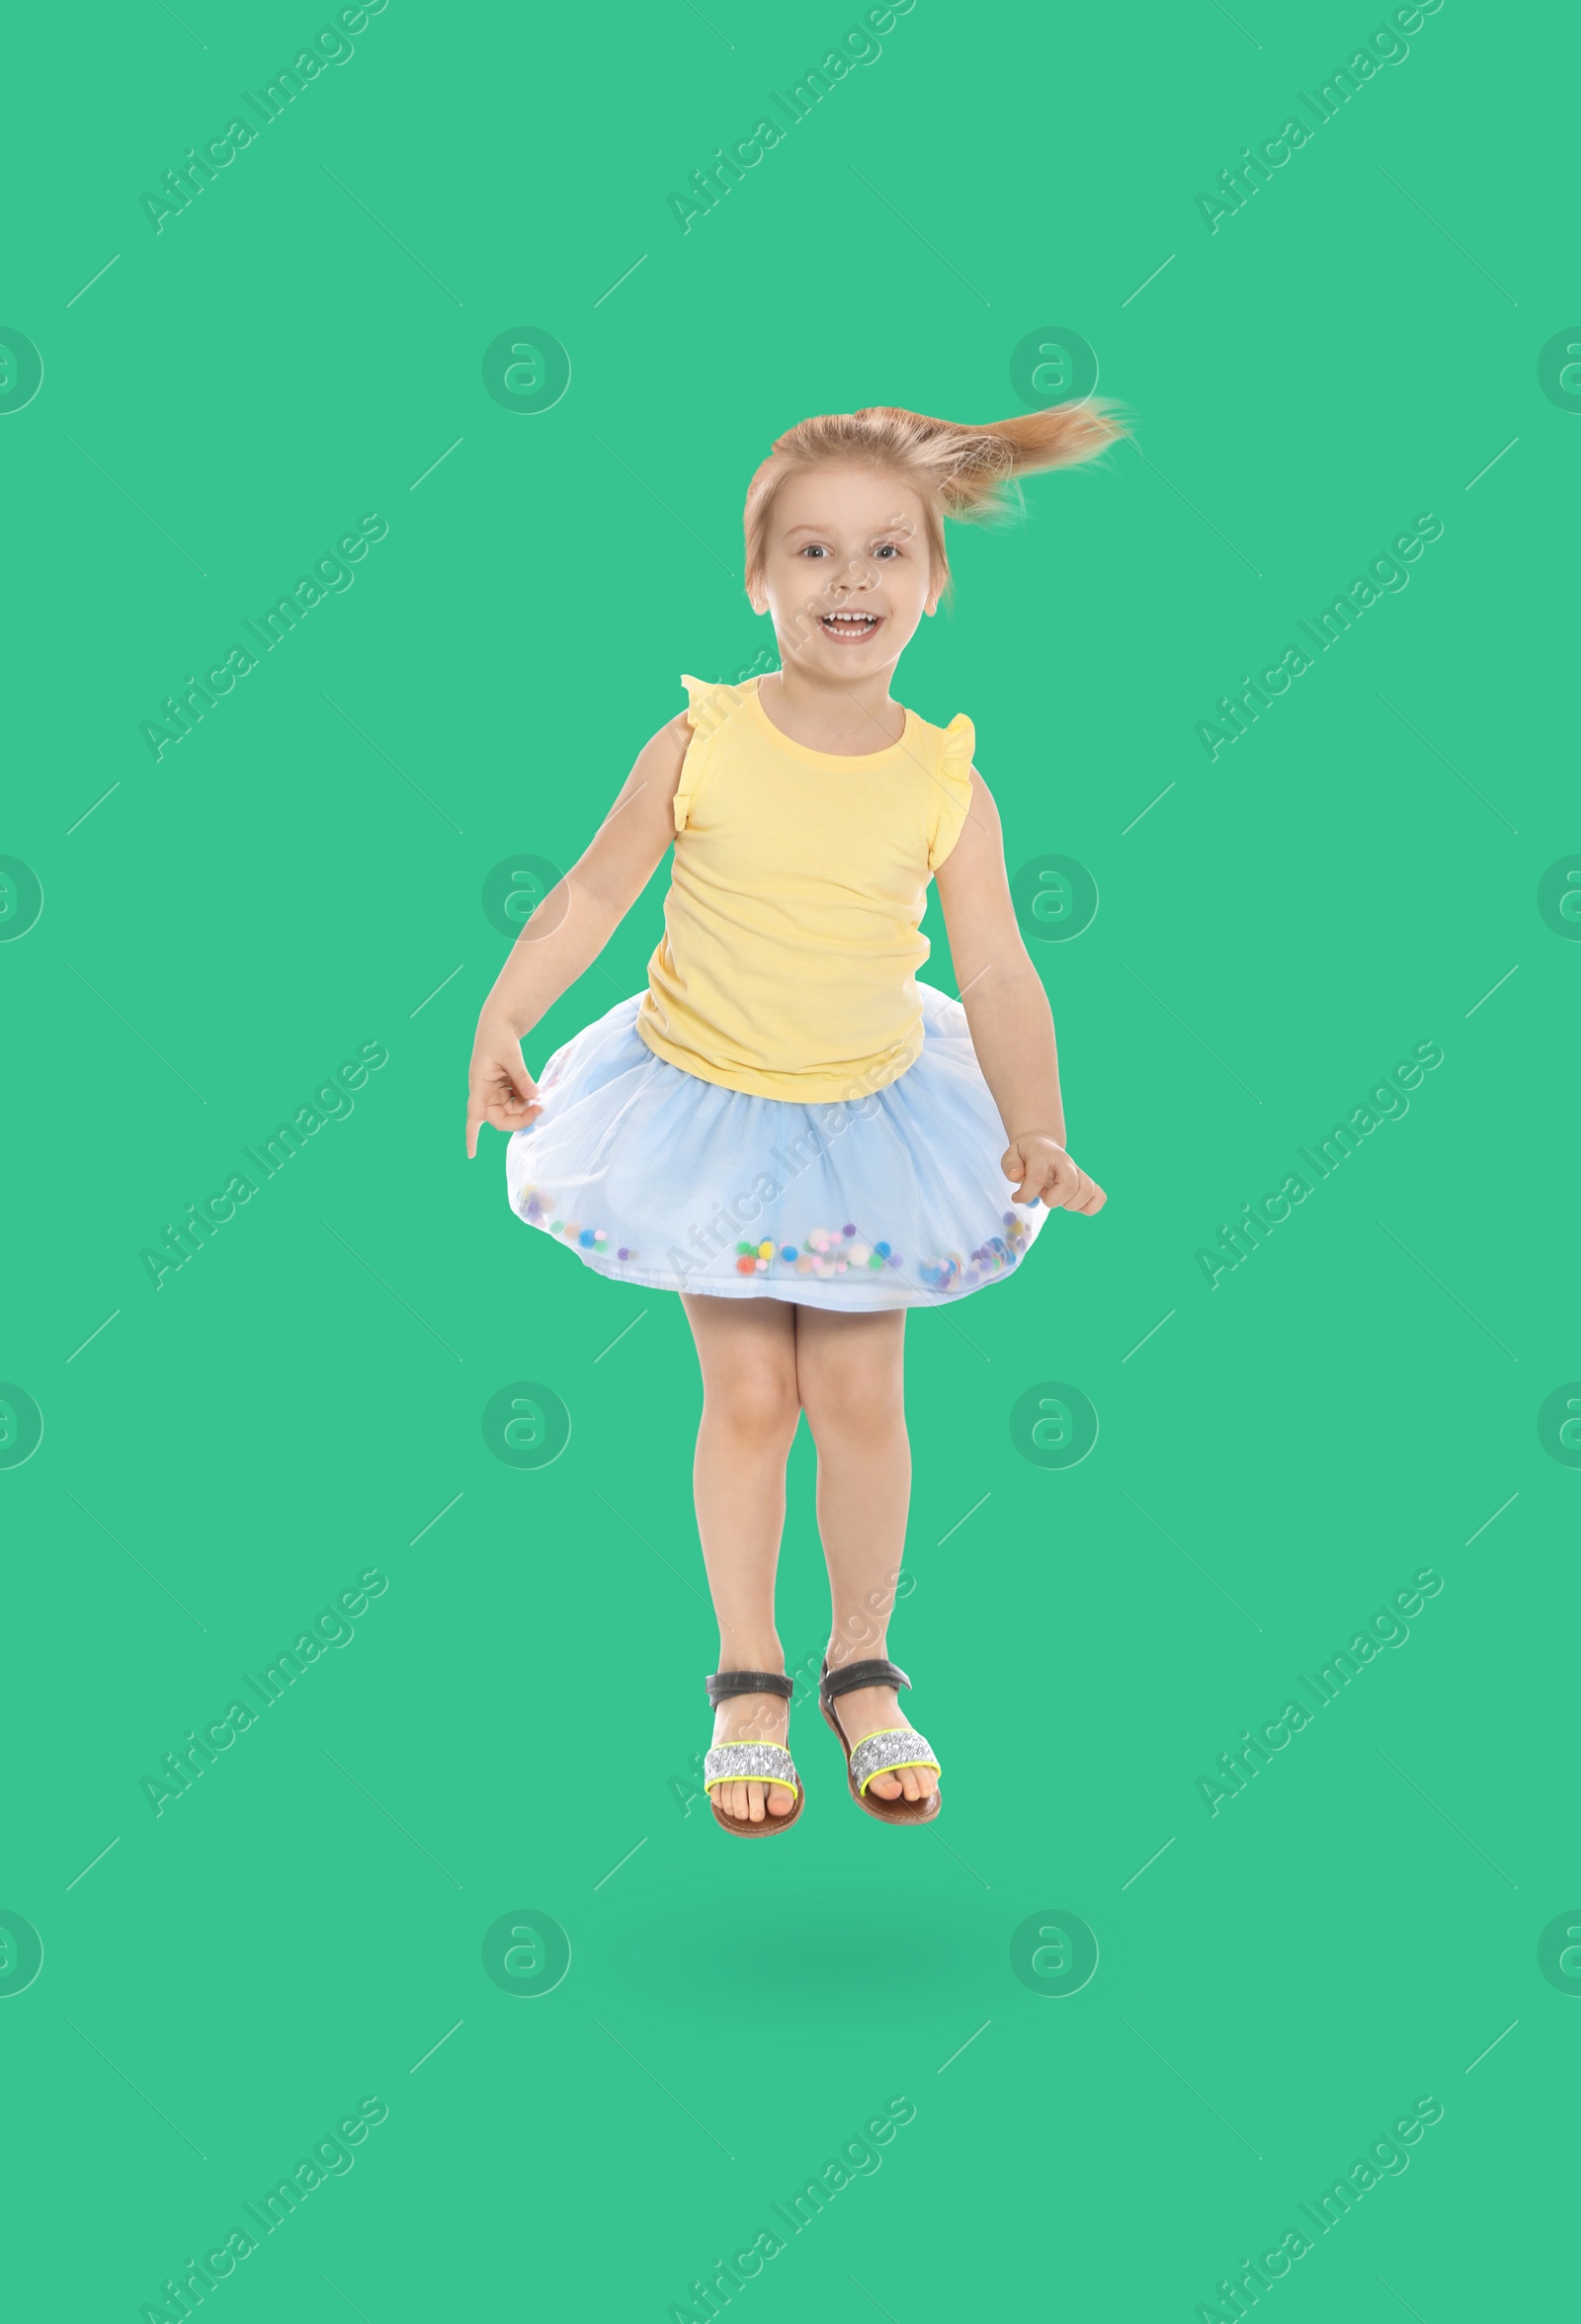 Image of Happy cute girl jumping on turquoise background